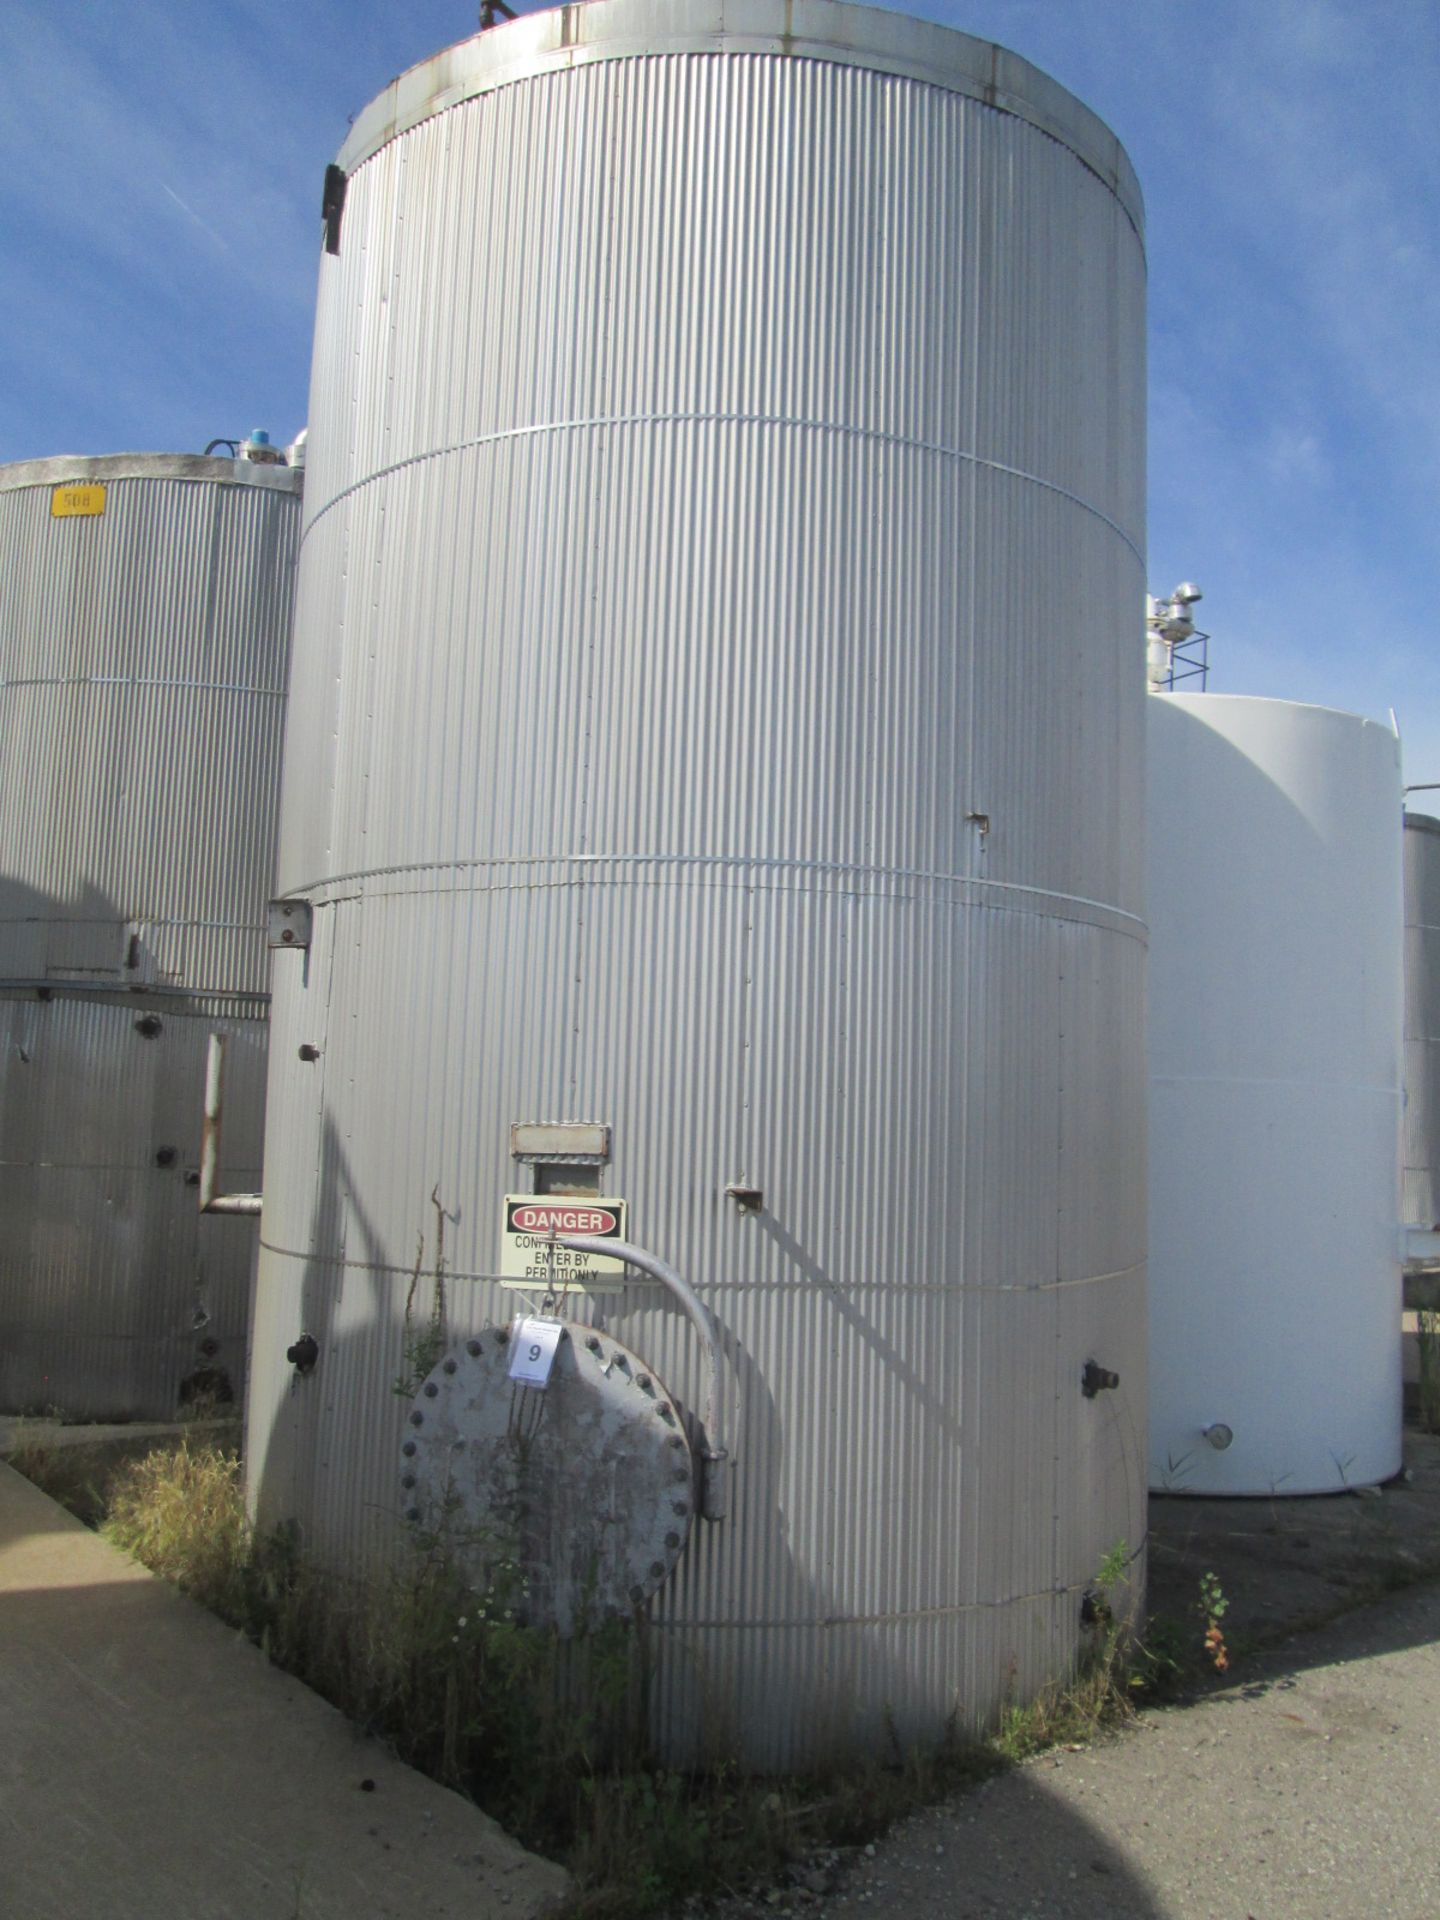 8000 Gallon (approx) O'Conner Carbon Steel Tank, Serial Number T-1205